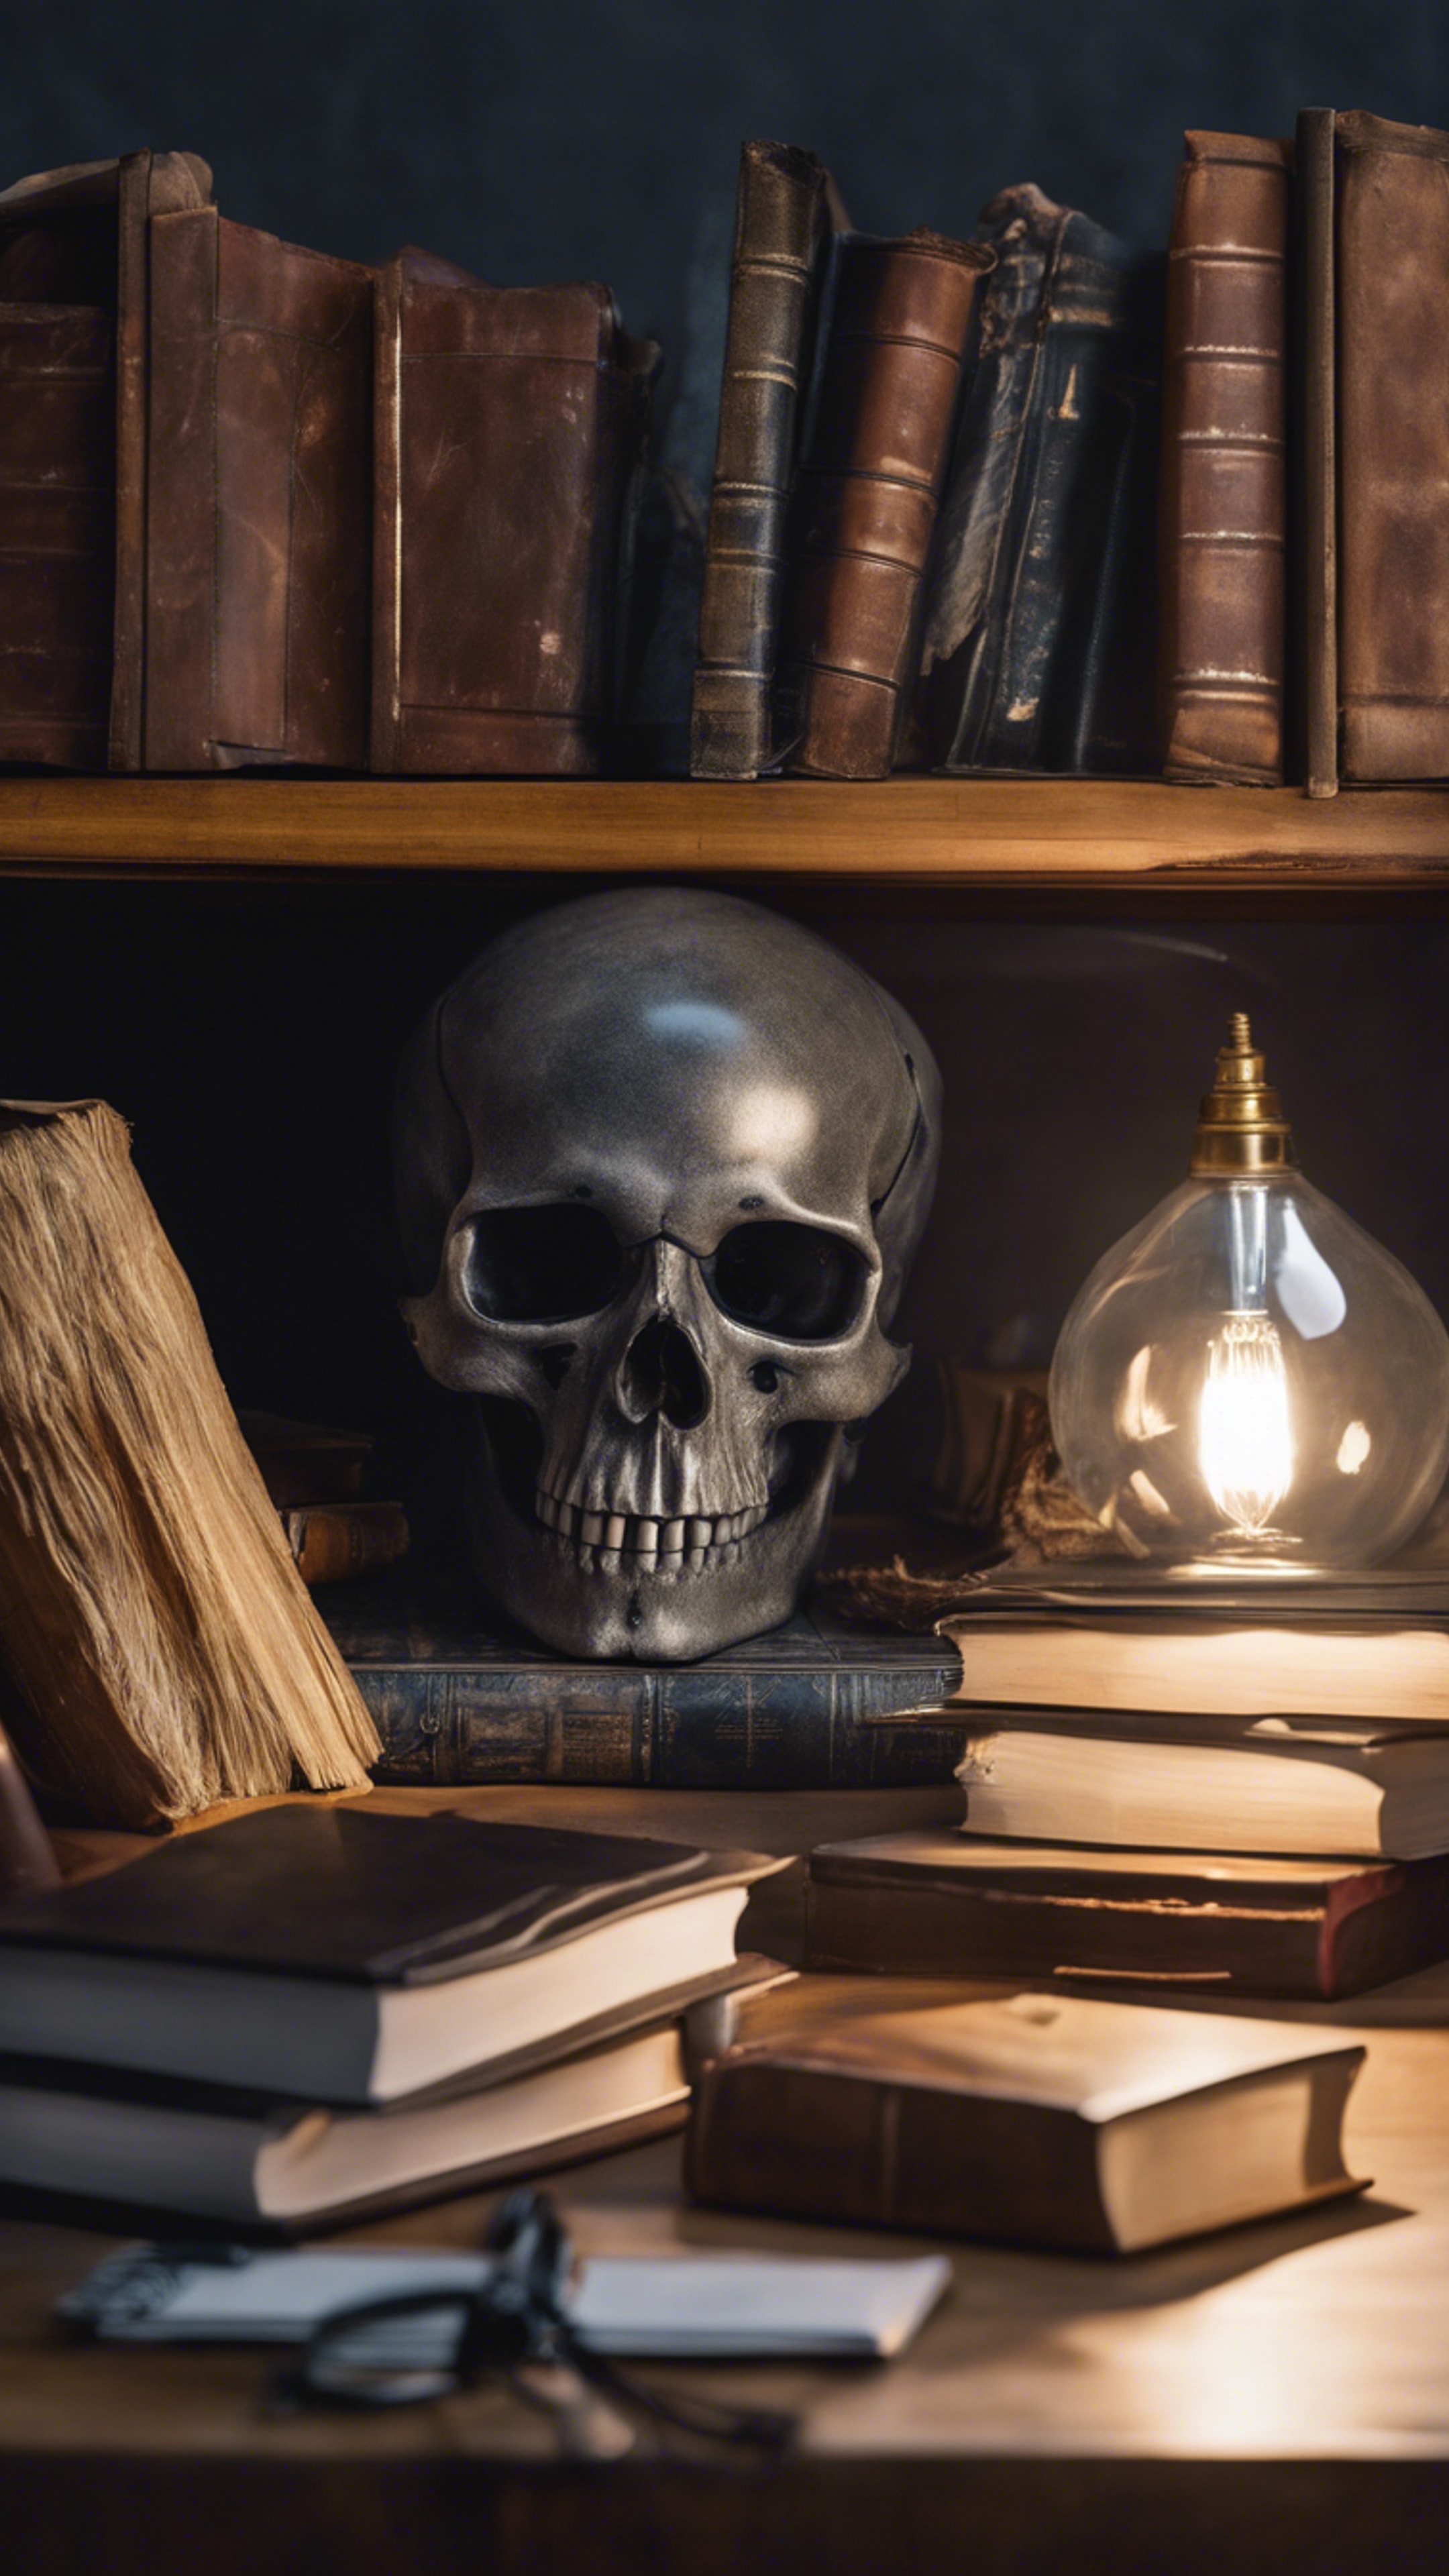 A study desk with a gray skull paperweight, surrounded by scattered books and a dimly lit lamp. 牆紙[9ada7a5adc764debb4f2]